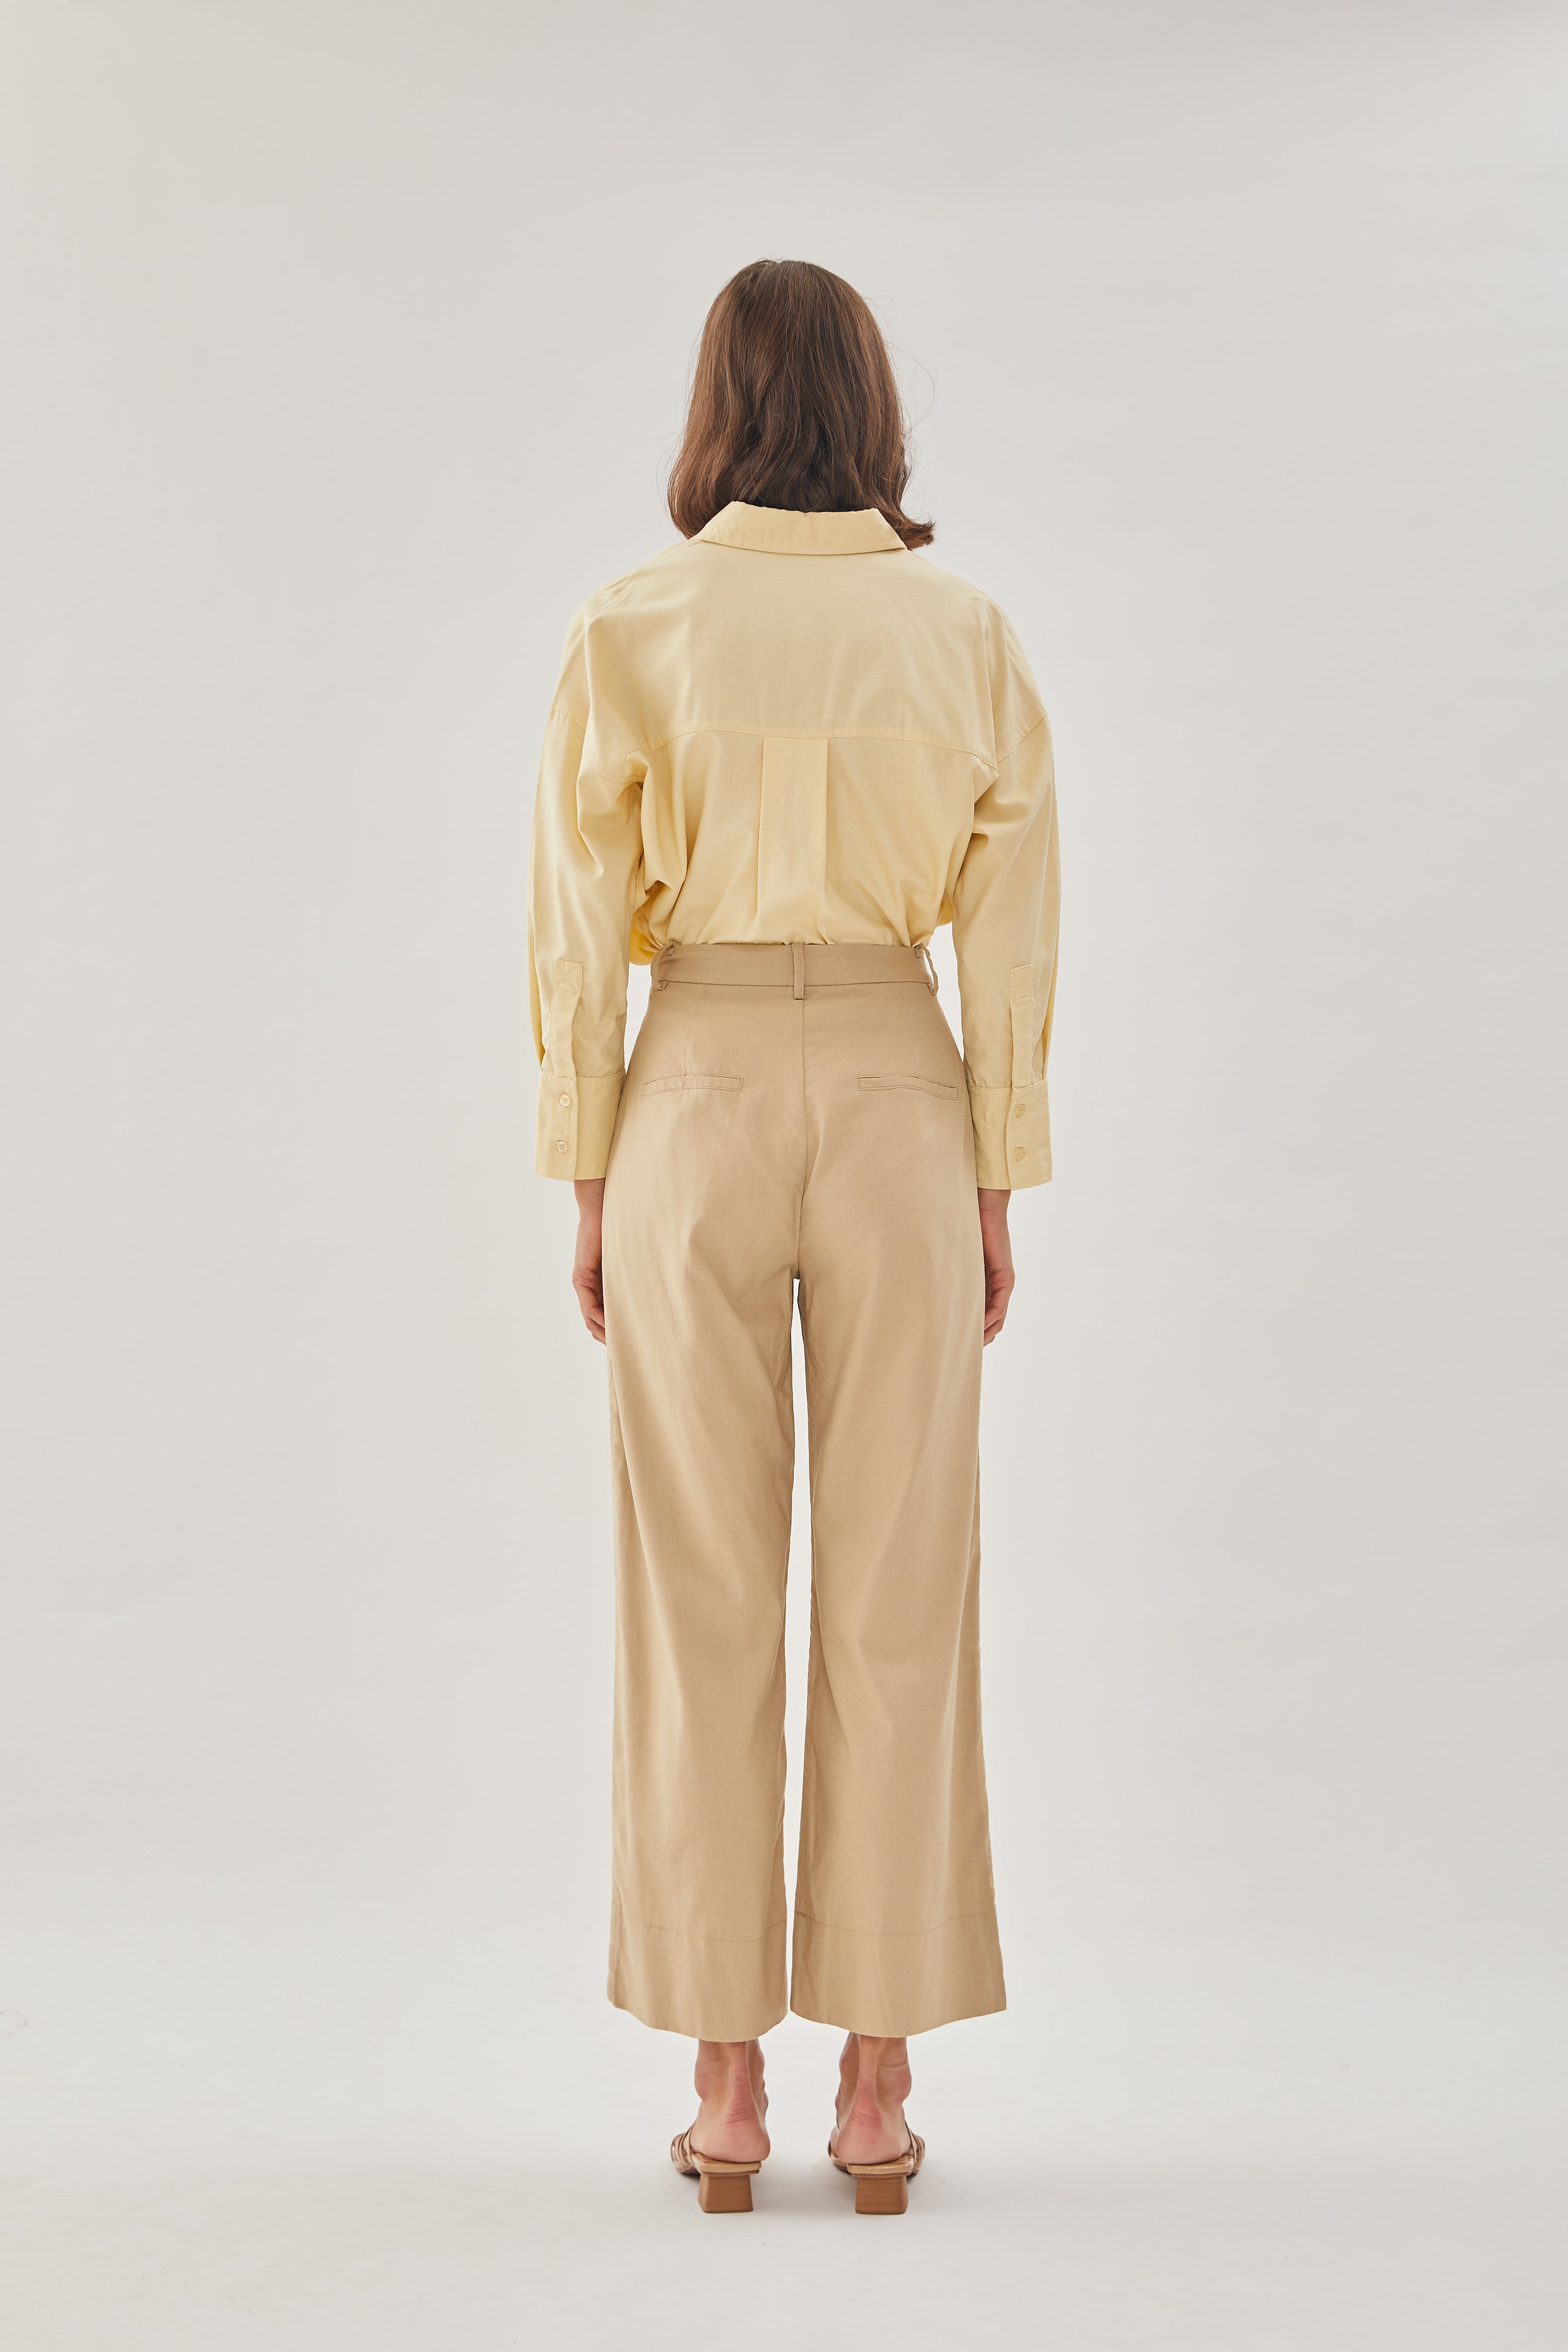 Linen Straight Pants in Sand